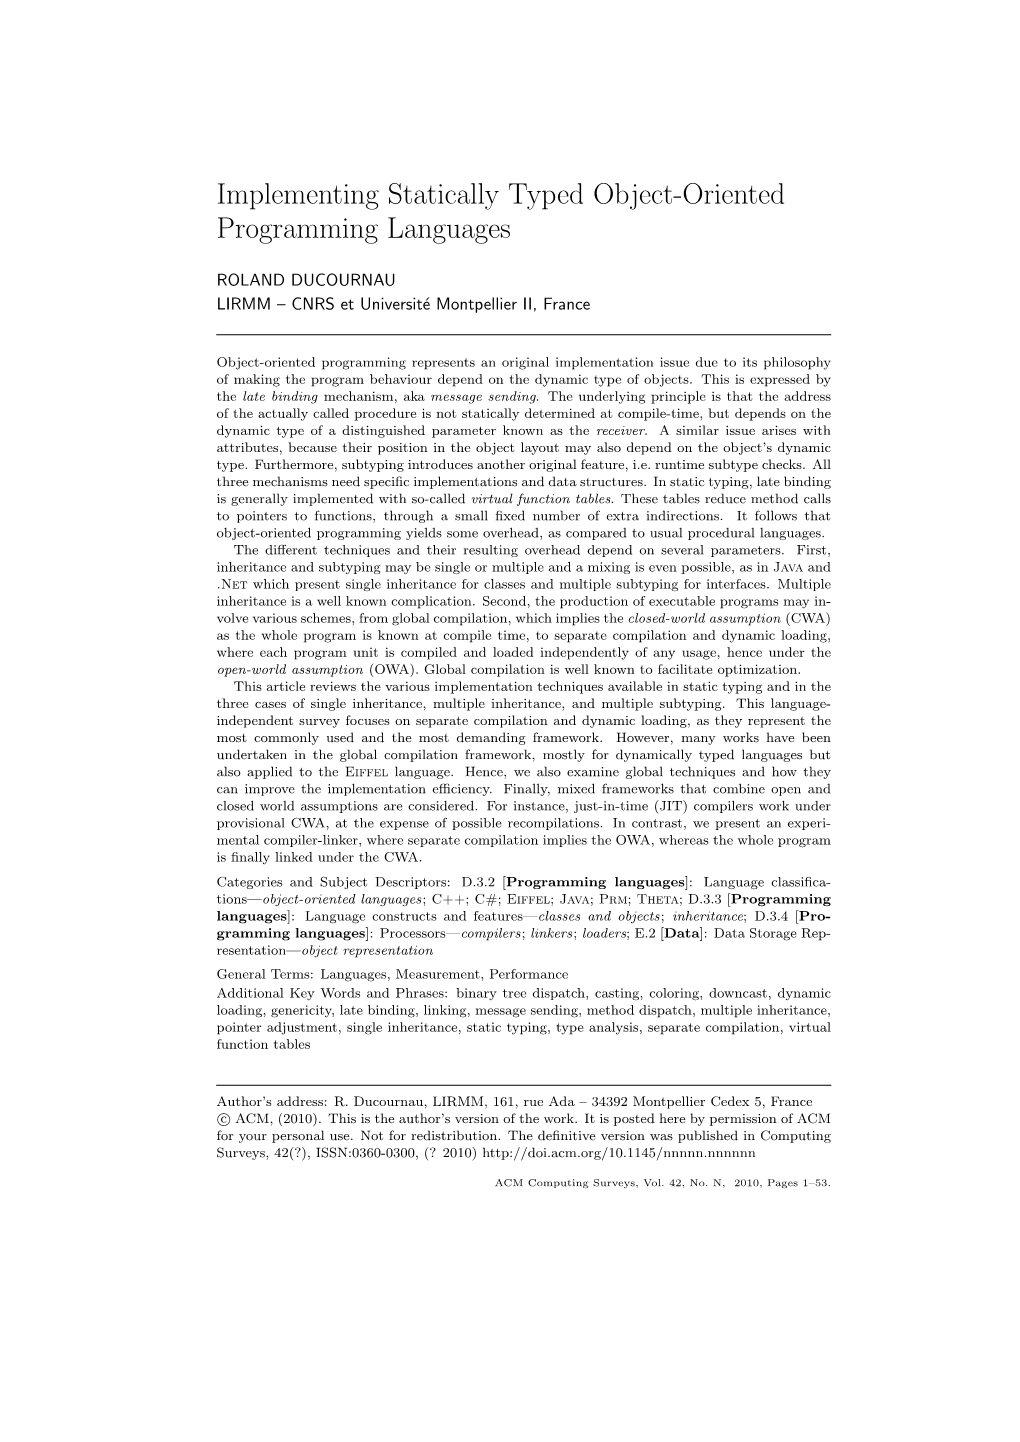 Implementing Statically Typed Object-Oriented Programming Languages